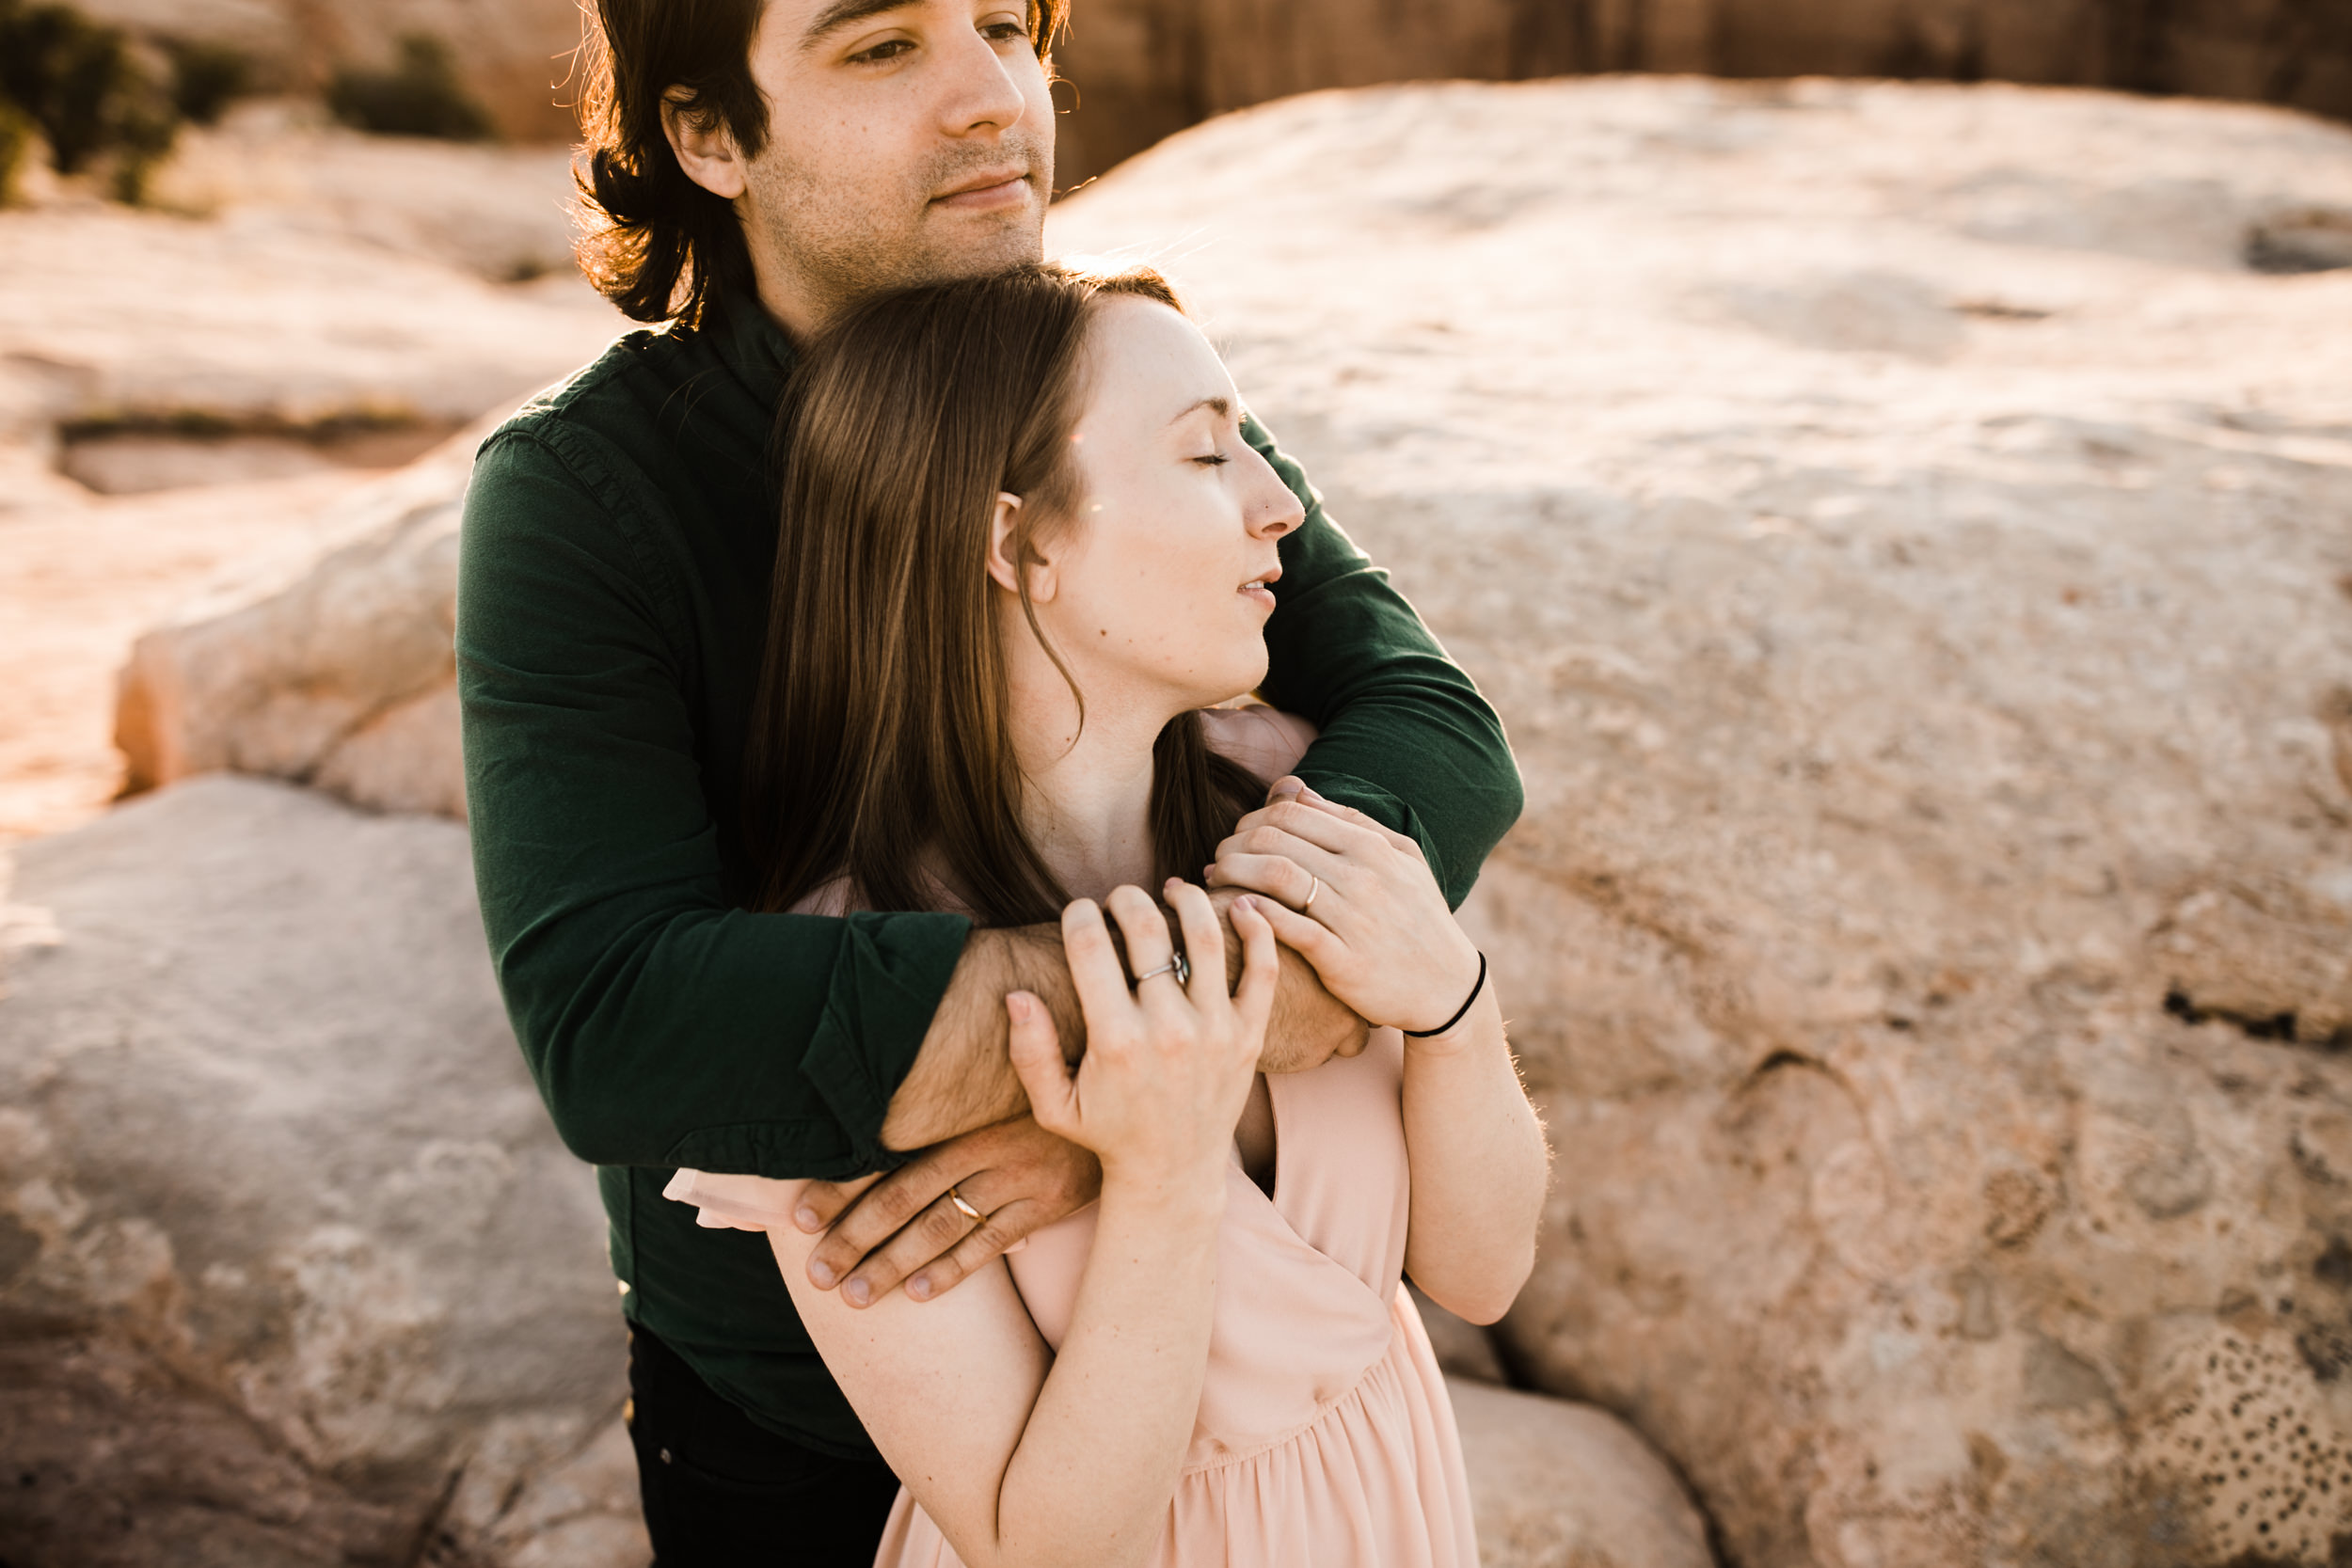 michelle + damian's post-elopement adventure session in moab | moab elopement photographer